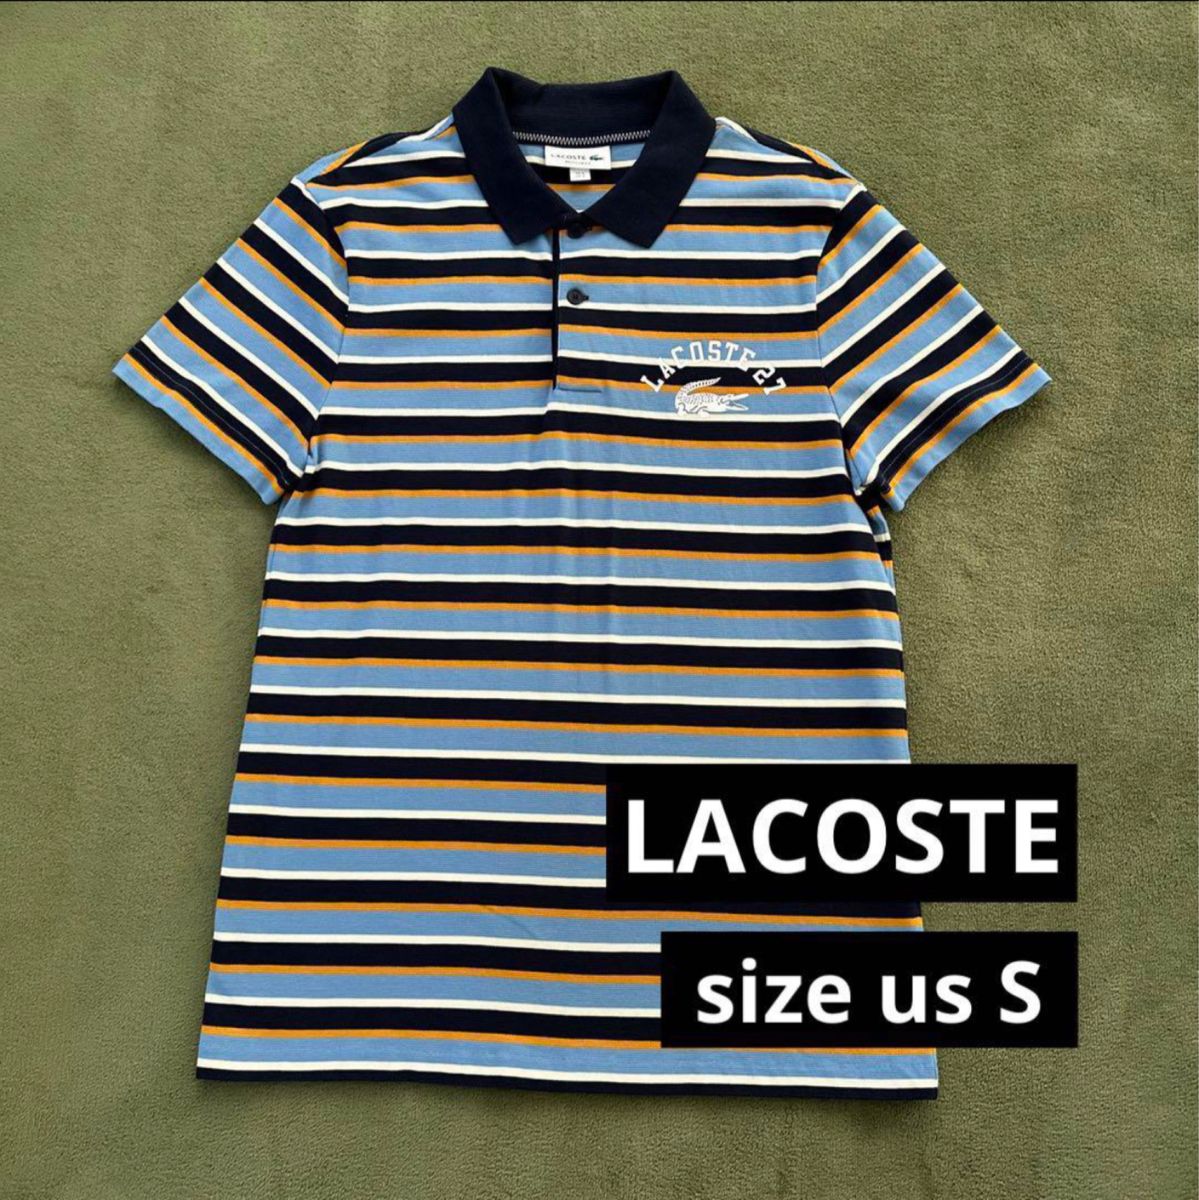 LACOSTE ラコステ　ボーダー　ポロシャツ　size us S